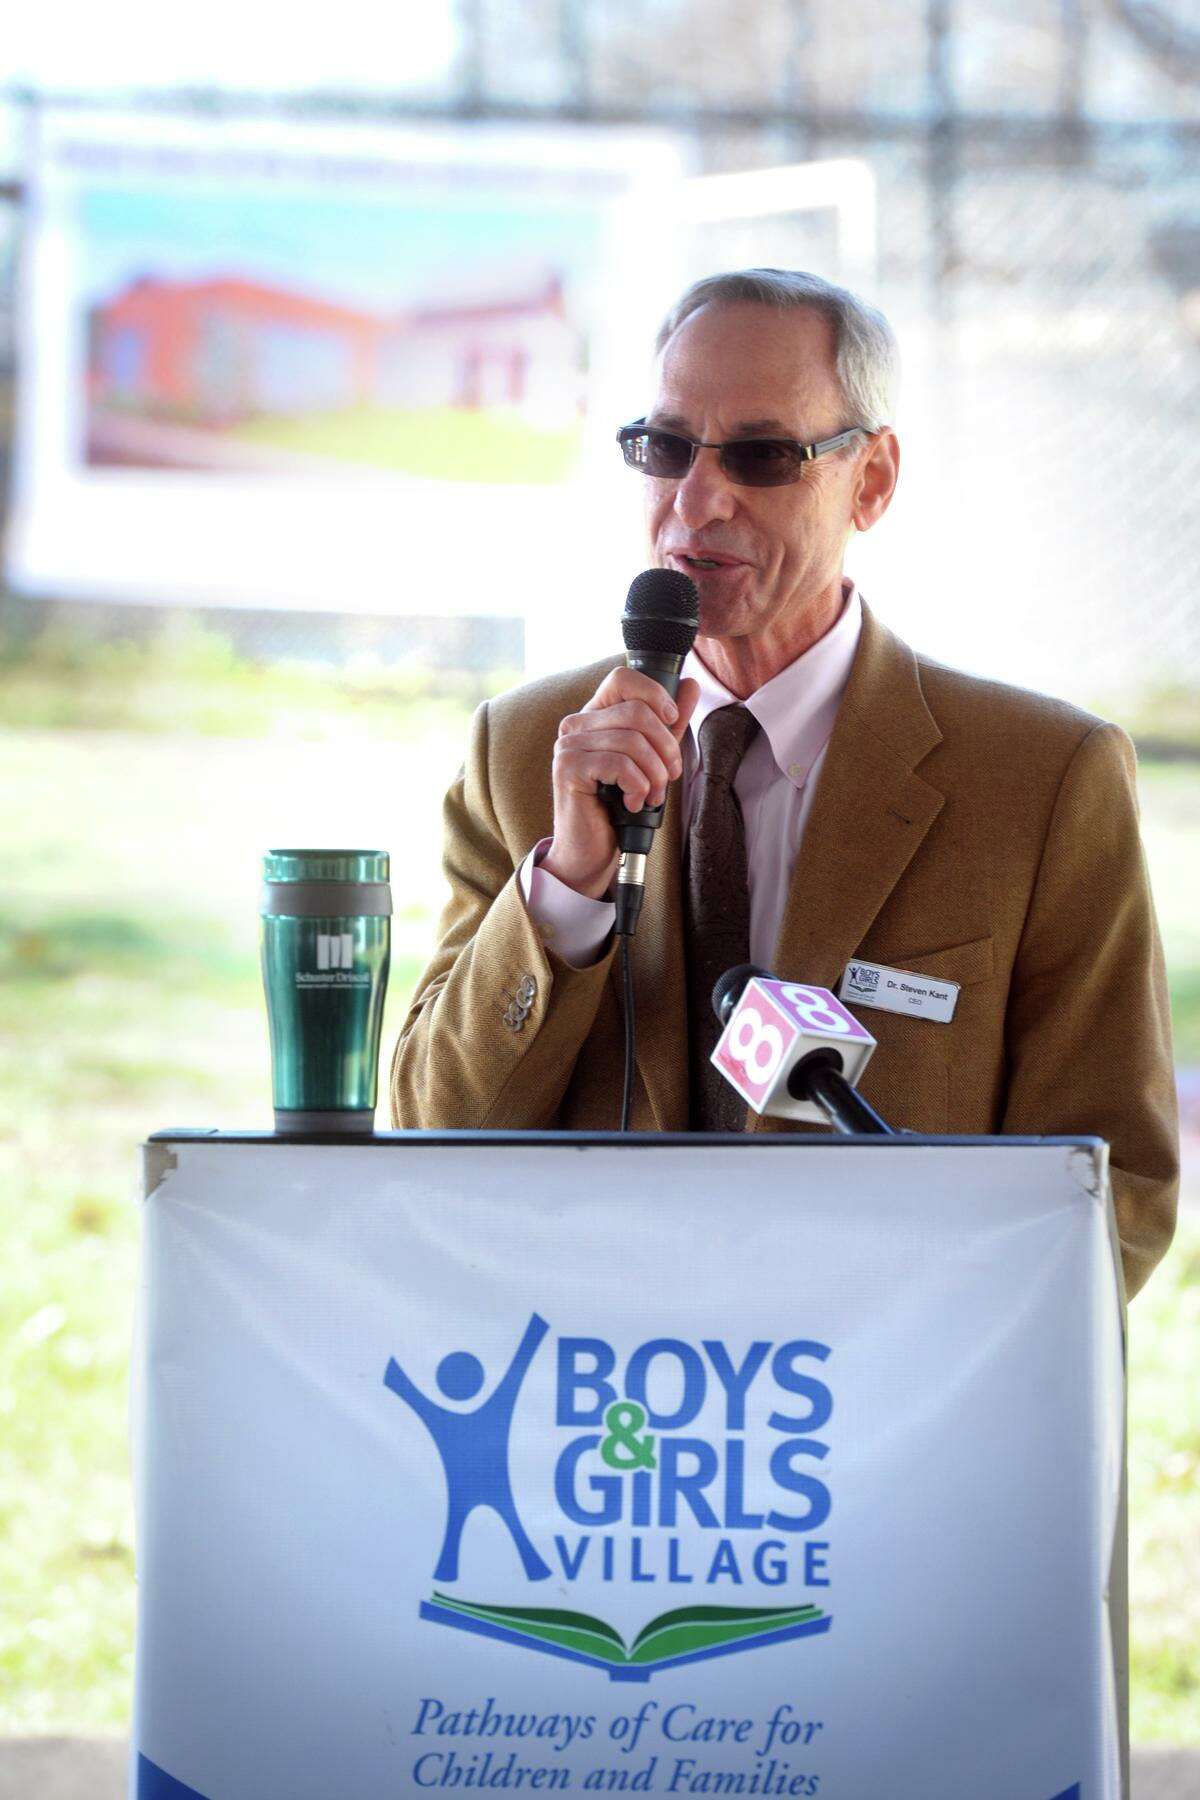 Dr. Steven Kant, CEO of Boys & Girls Village, speaks during a ground-breaking ceremony for a new Life Skills and Vocational Training Facility on the Milford, Conn. campus Nov. 15, 2019.